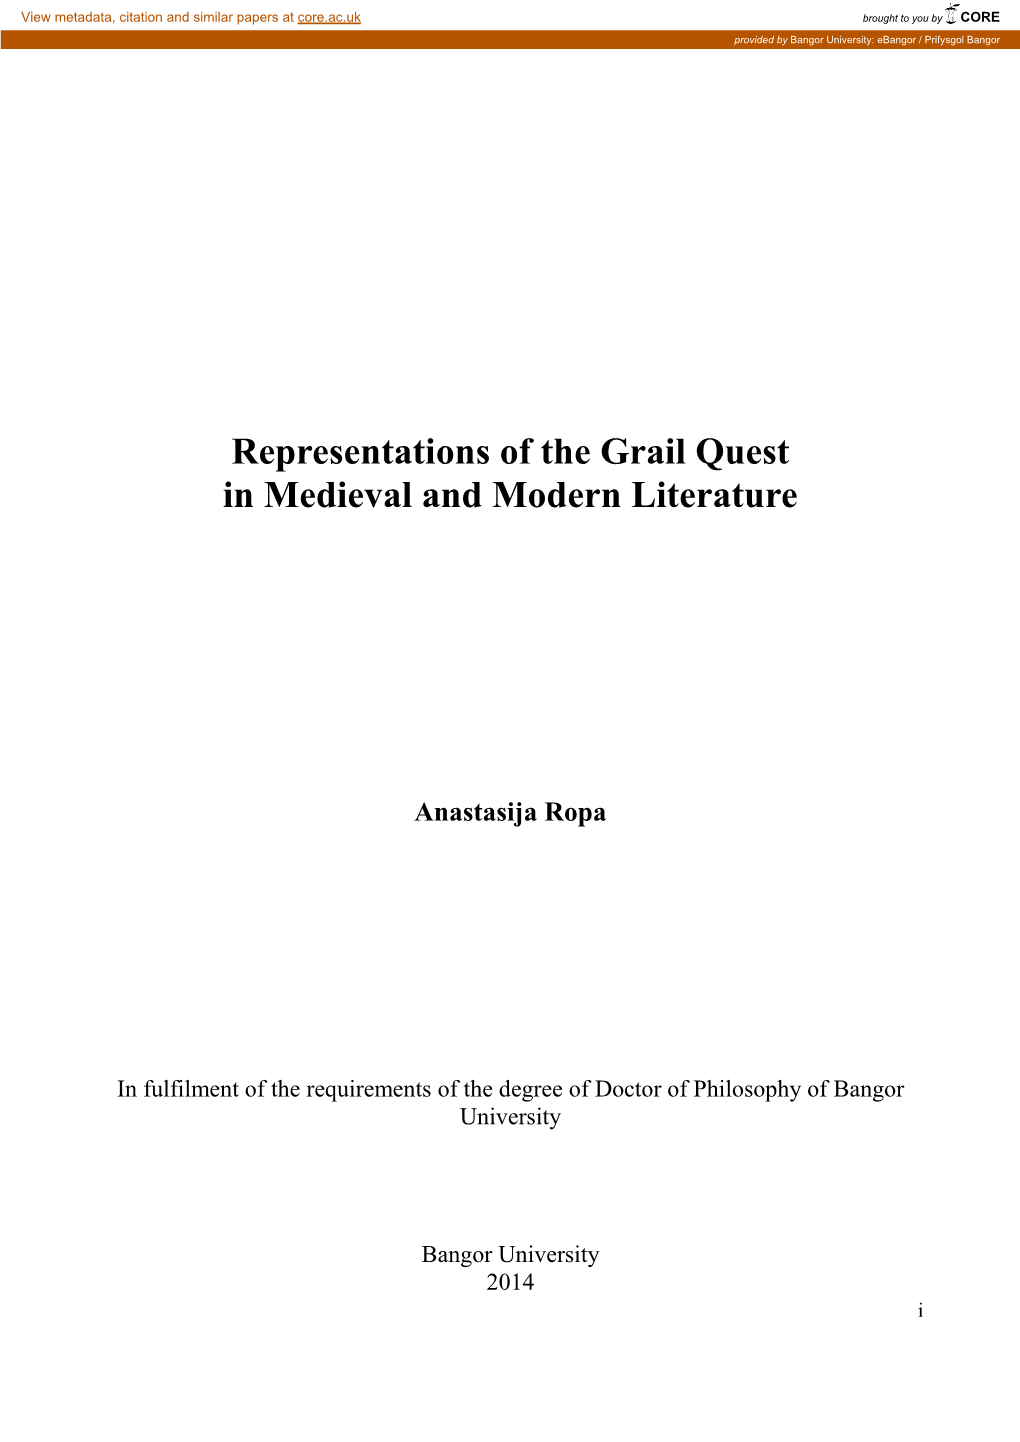 Representations of the Grail Quest in Medieval and Modern Literature